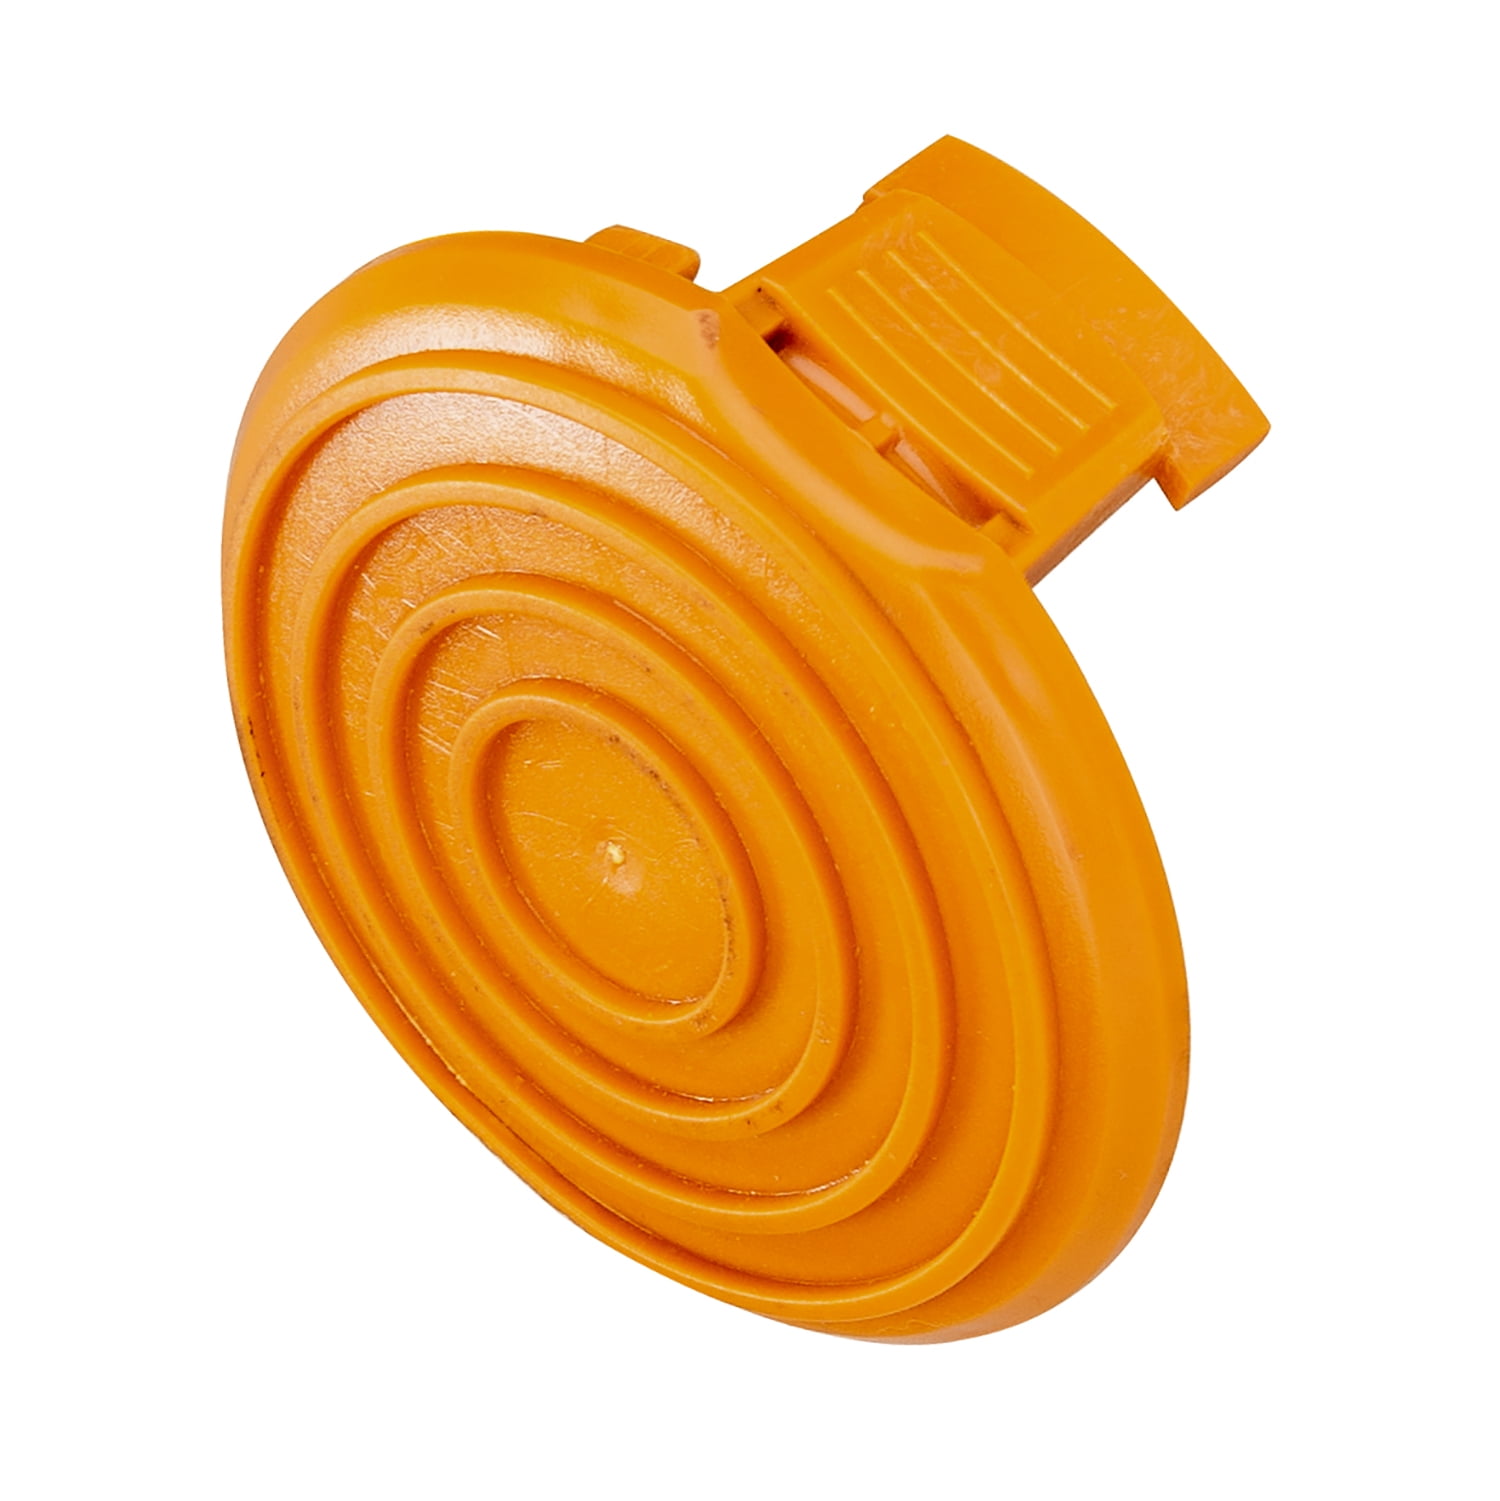 Details about   Spool Cap Cover For Worx Grass Trimmer WG150 WG160 WG175 WG180 50006531 WA6531 